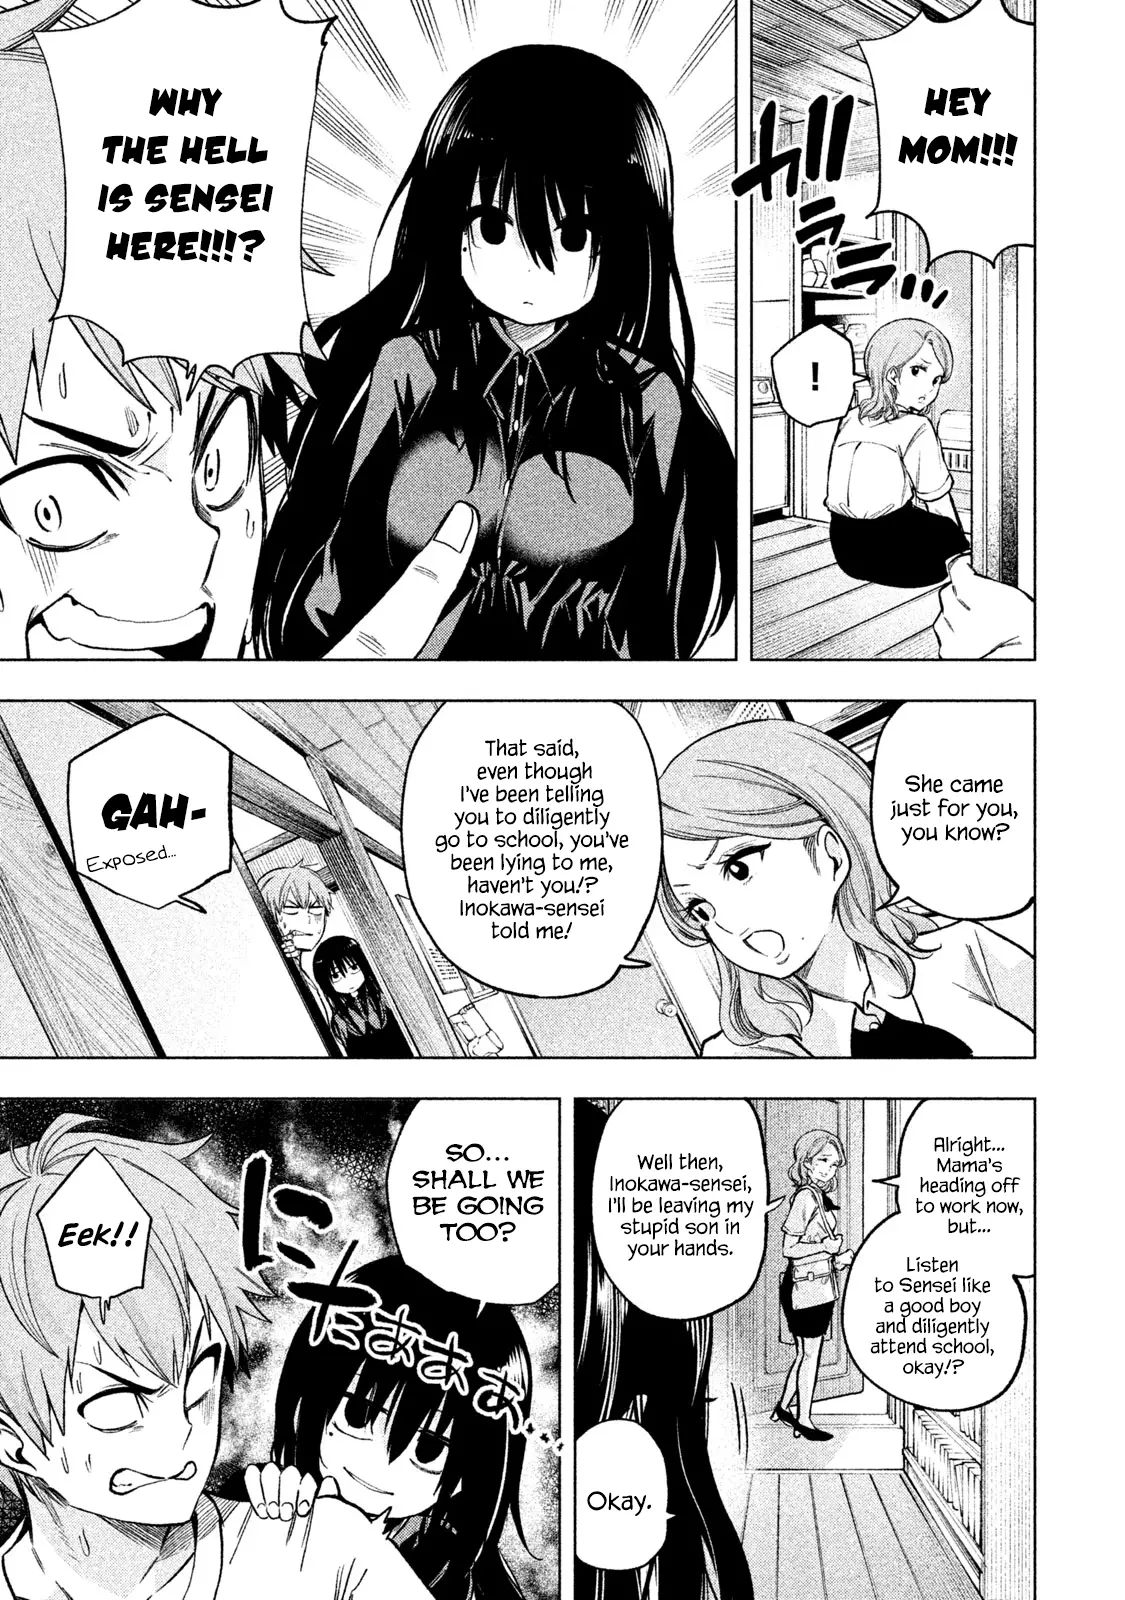 Why are you here Sensei!? - 52 page 3